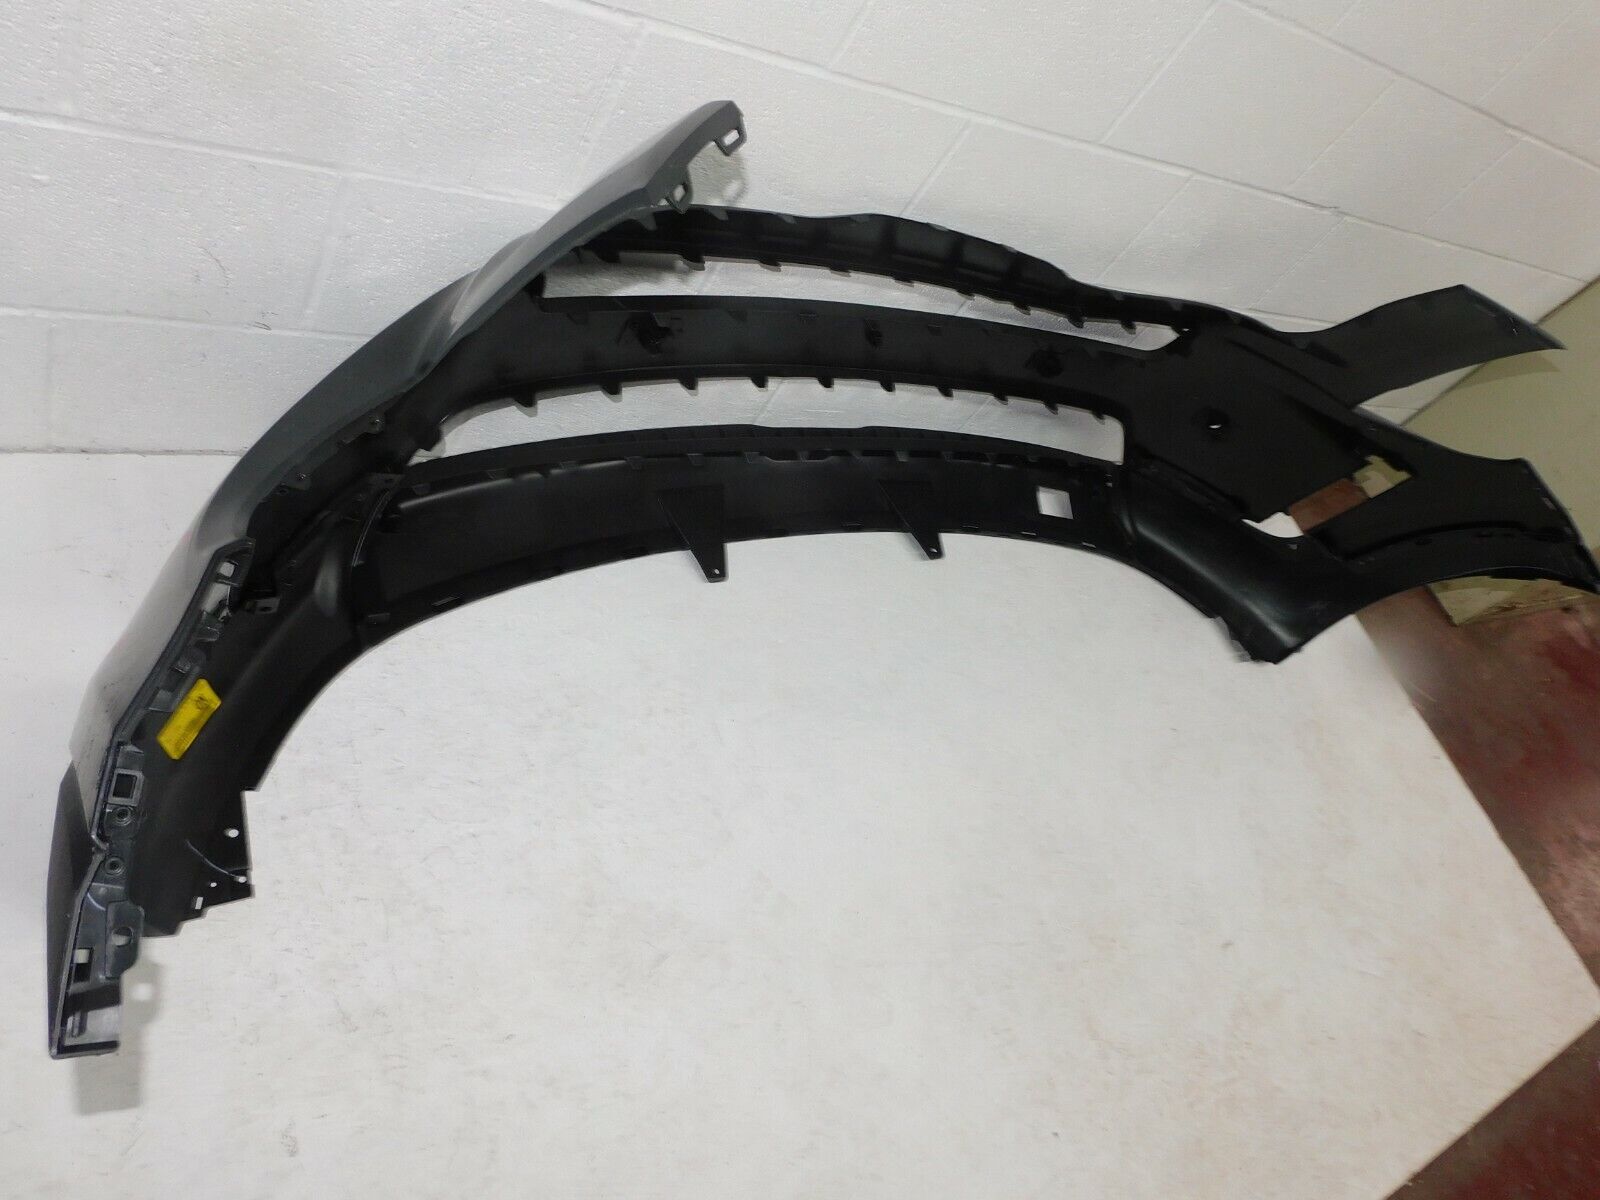 Used 2020 2022 Kia Telluride Front Bumper Cover Oem With Sensor Holes For Sale 86511 S9000 2717